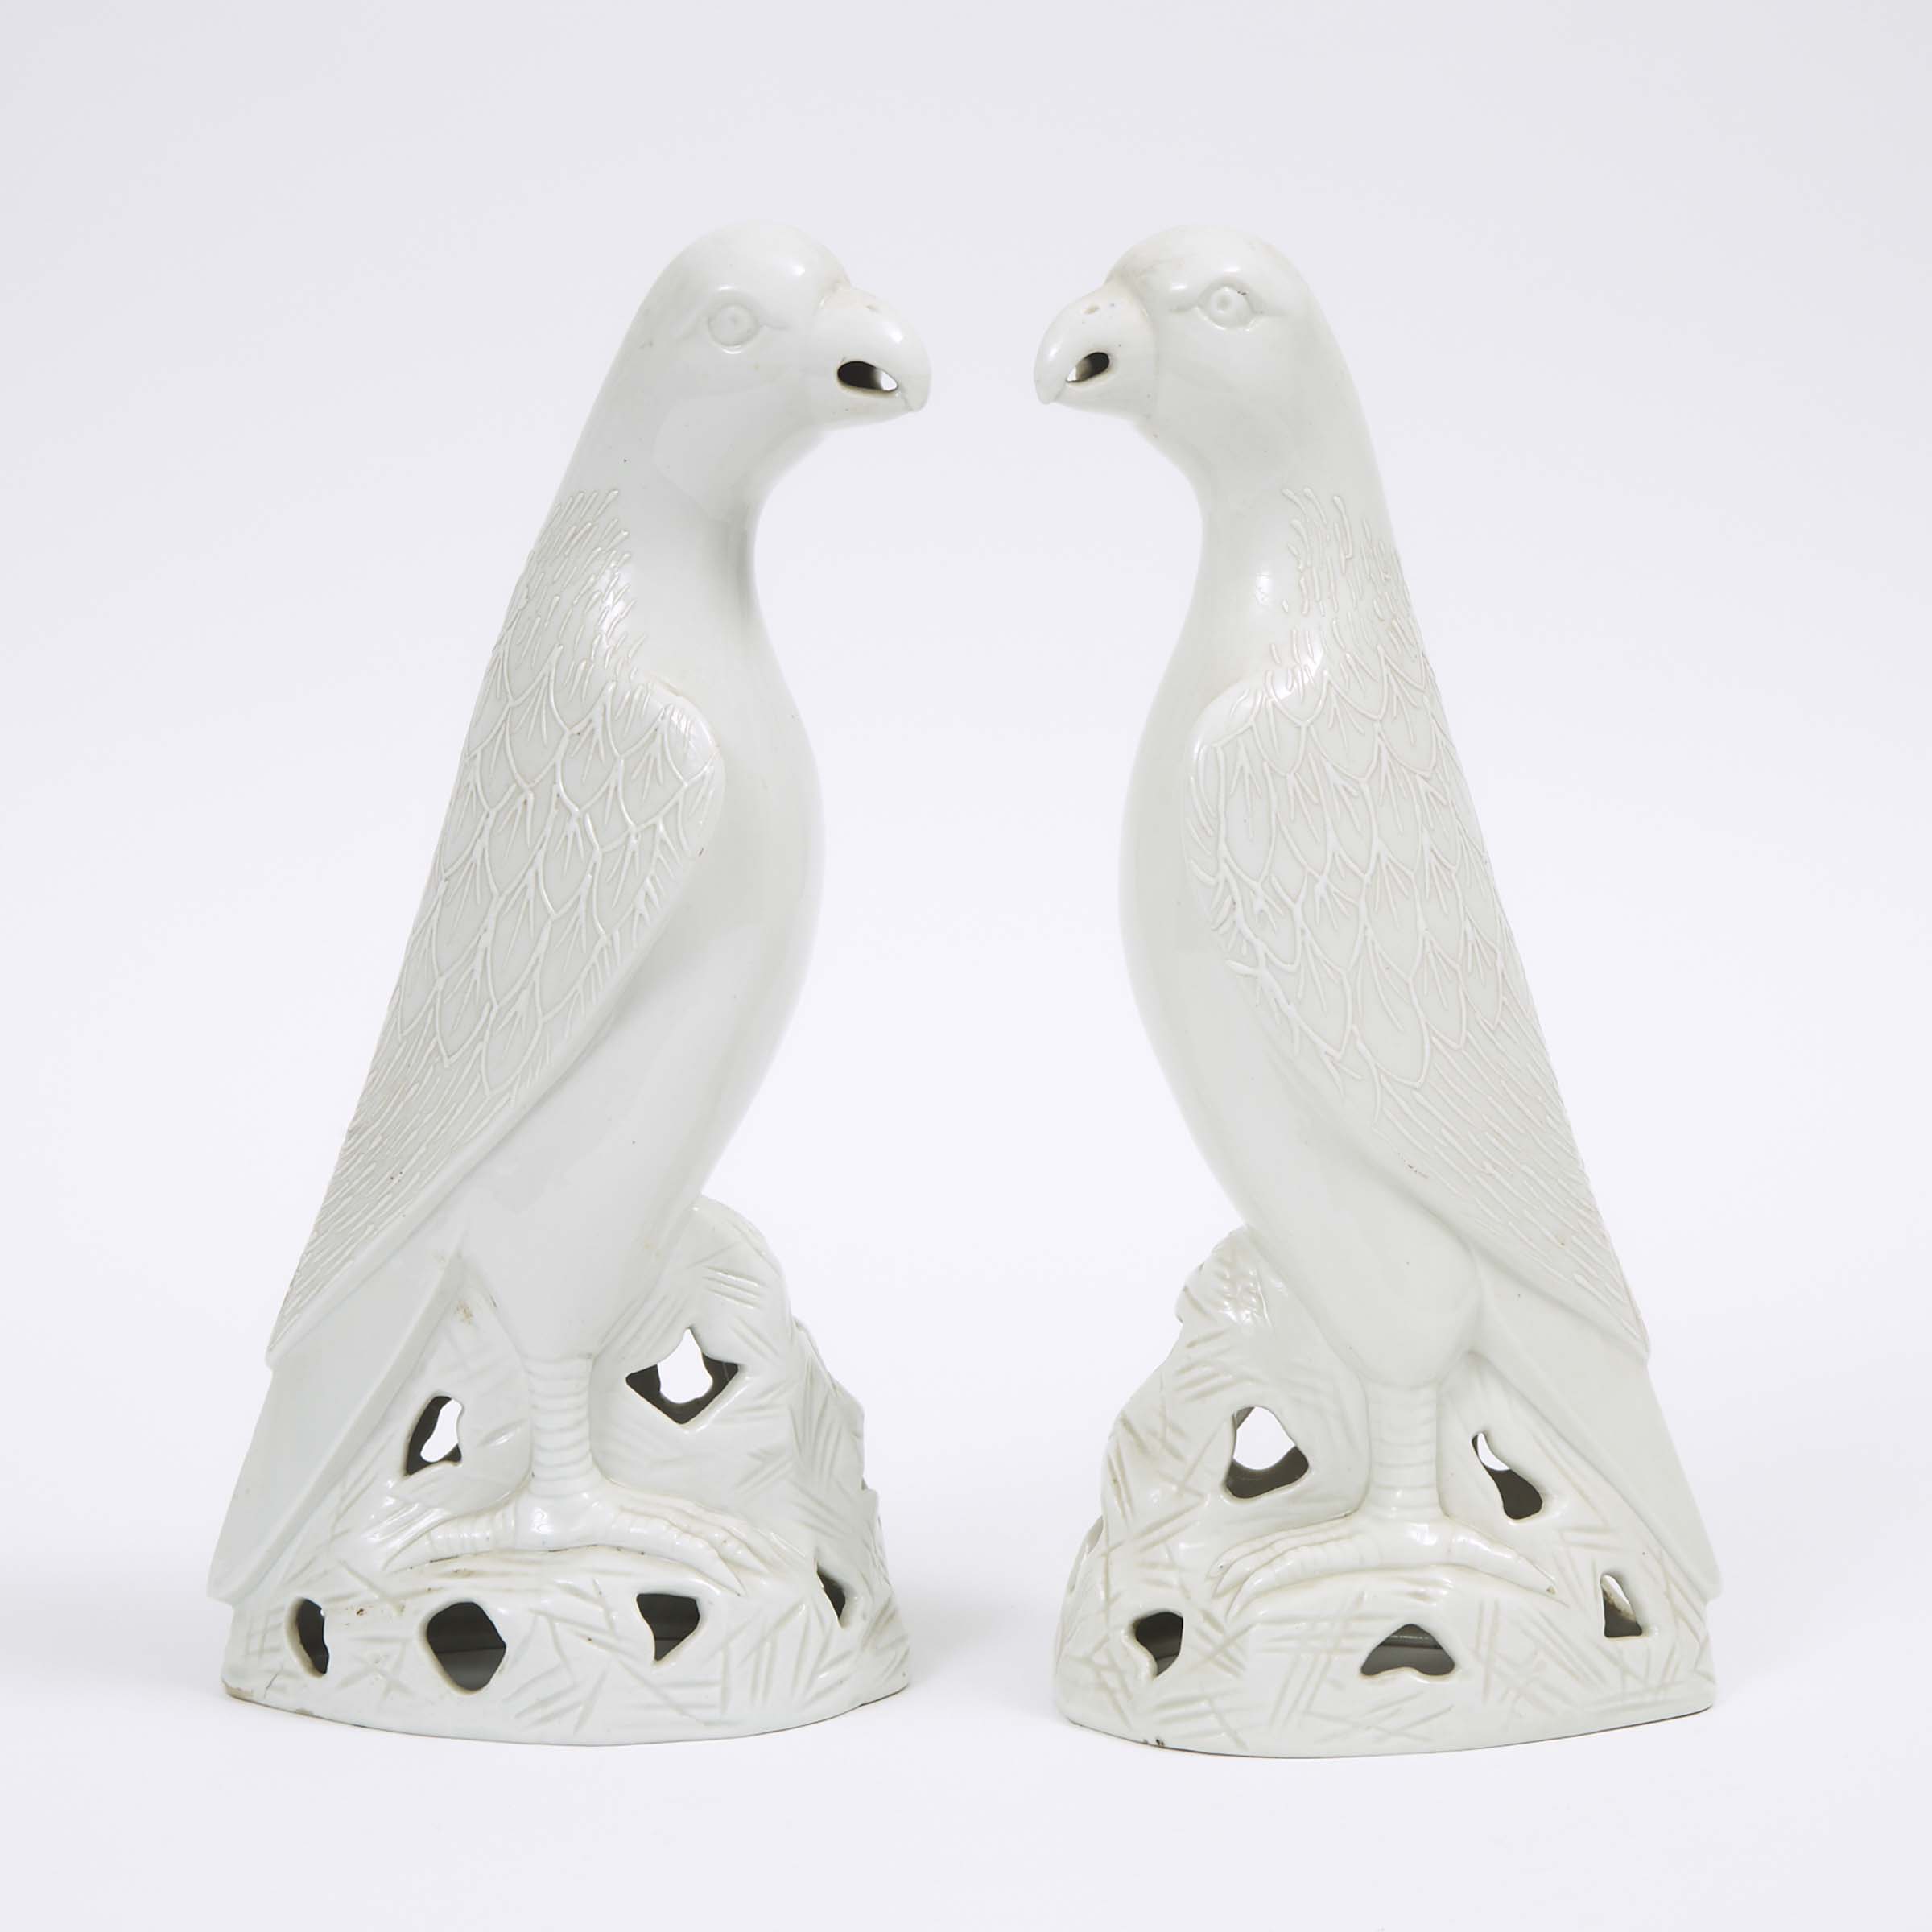 A Pair of Blanc-de-Chine Parrots, 19th Century or Later